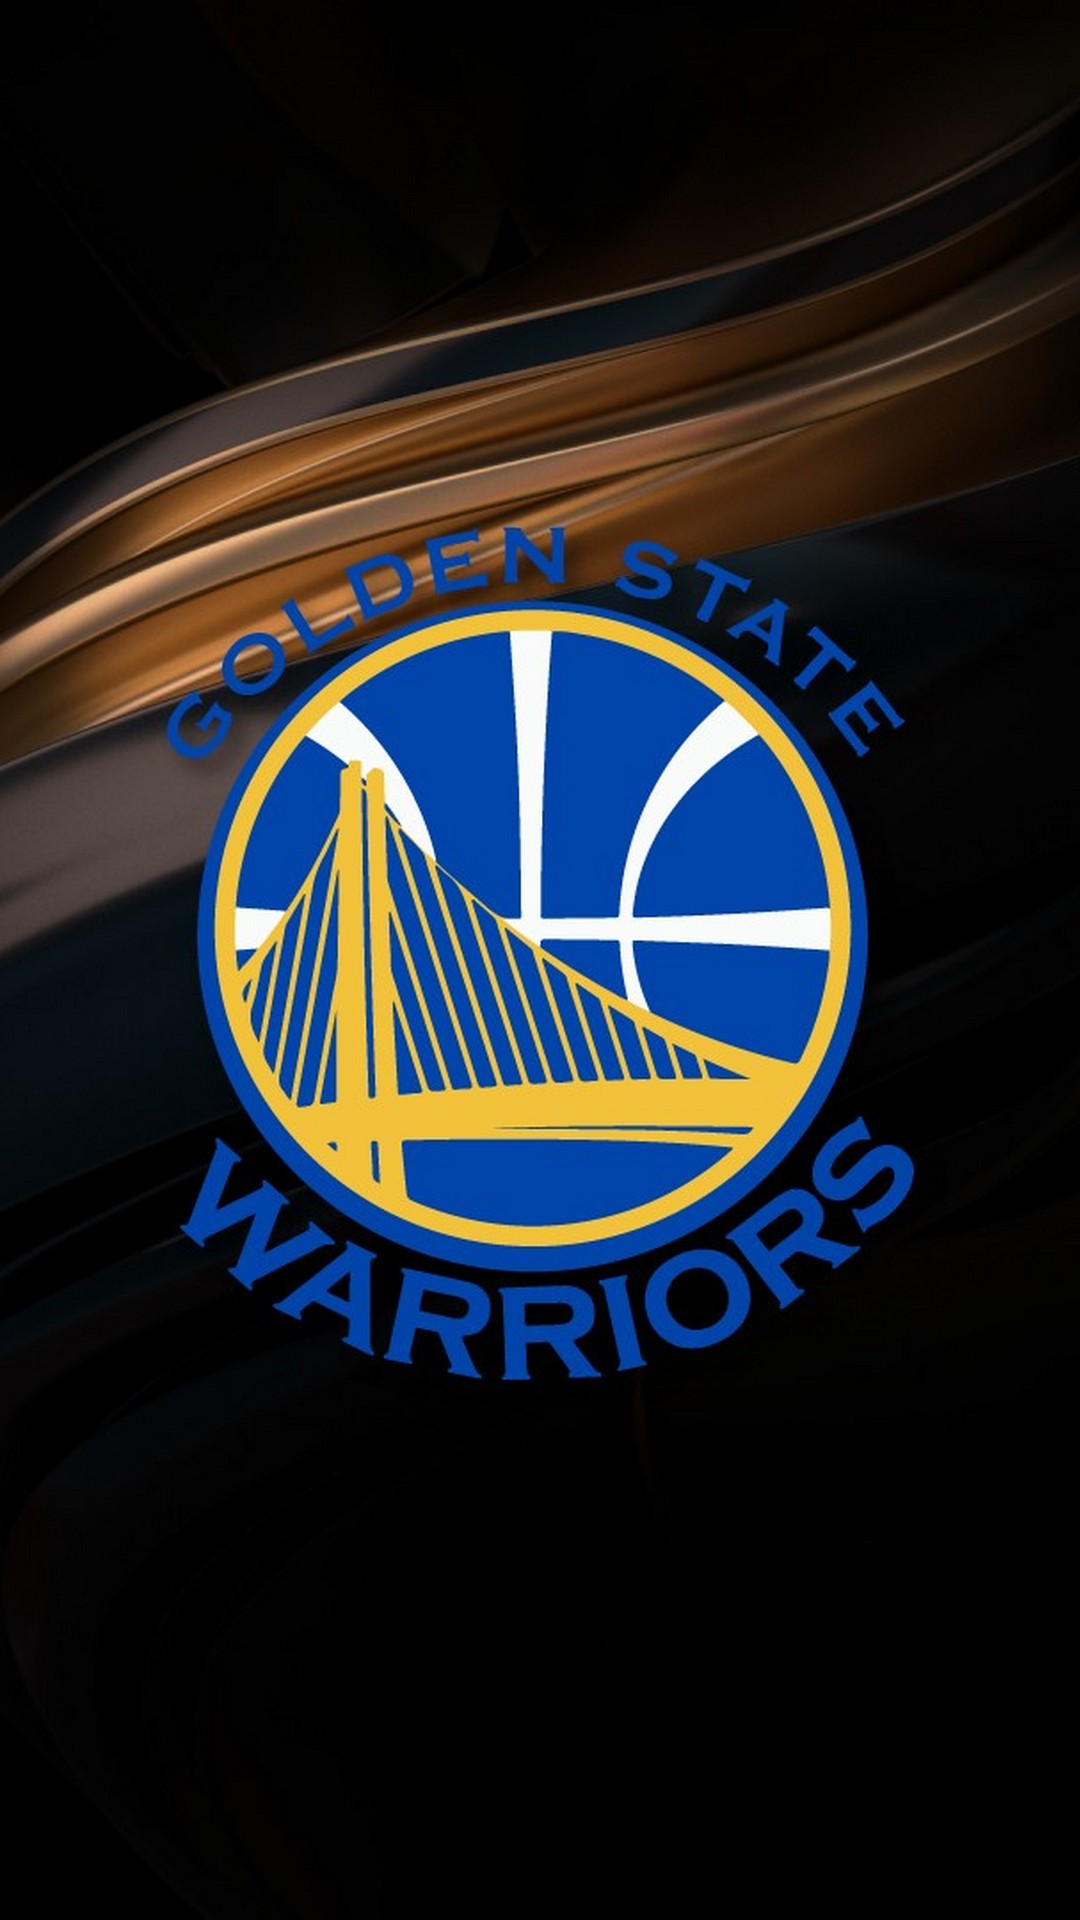 Golden State Mobile Wallpaper with image dimensions 1080x1920 pixel. You can make this wallpaper for your Desktop Computer Backgrounds, Windows or Mac Screensavers, iPhone Lock screen, Tablet or Android and another Mobile Phone device